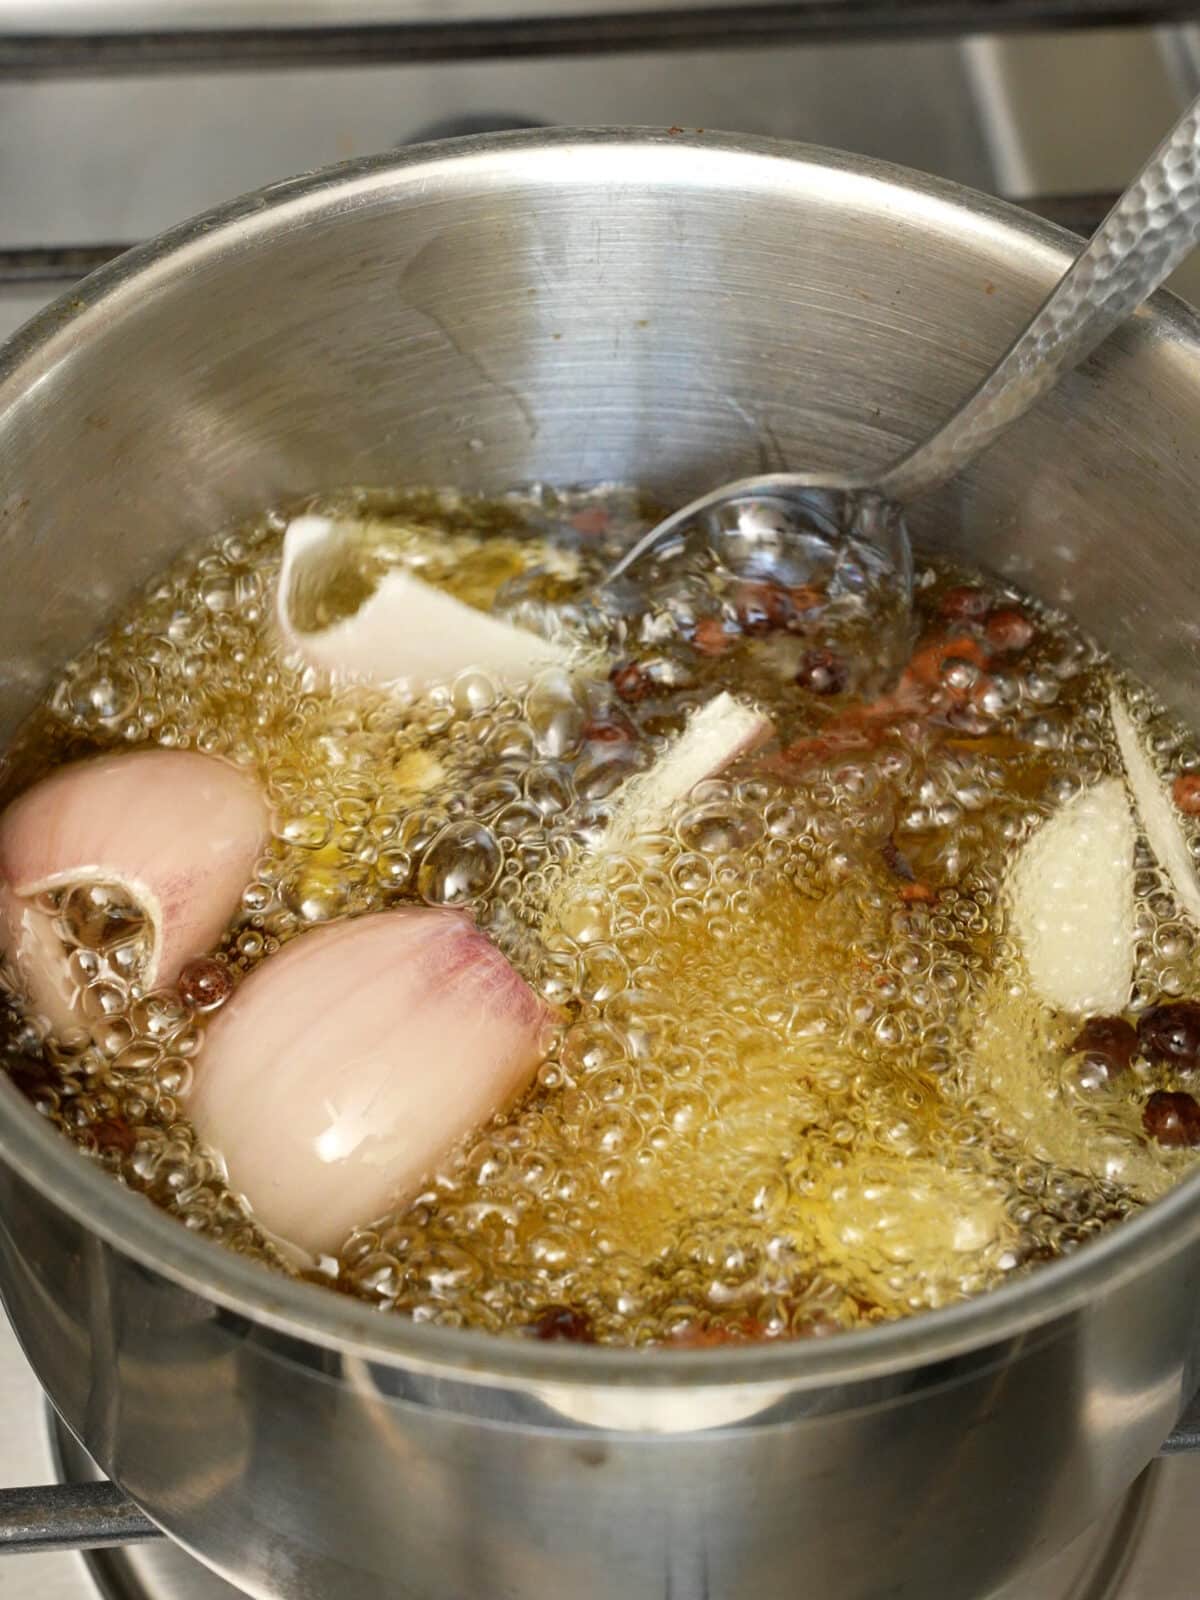 Fresh garlic, ginger, and shallots with dried spices infusing in neutral oil in a small pot.